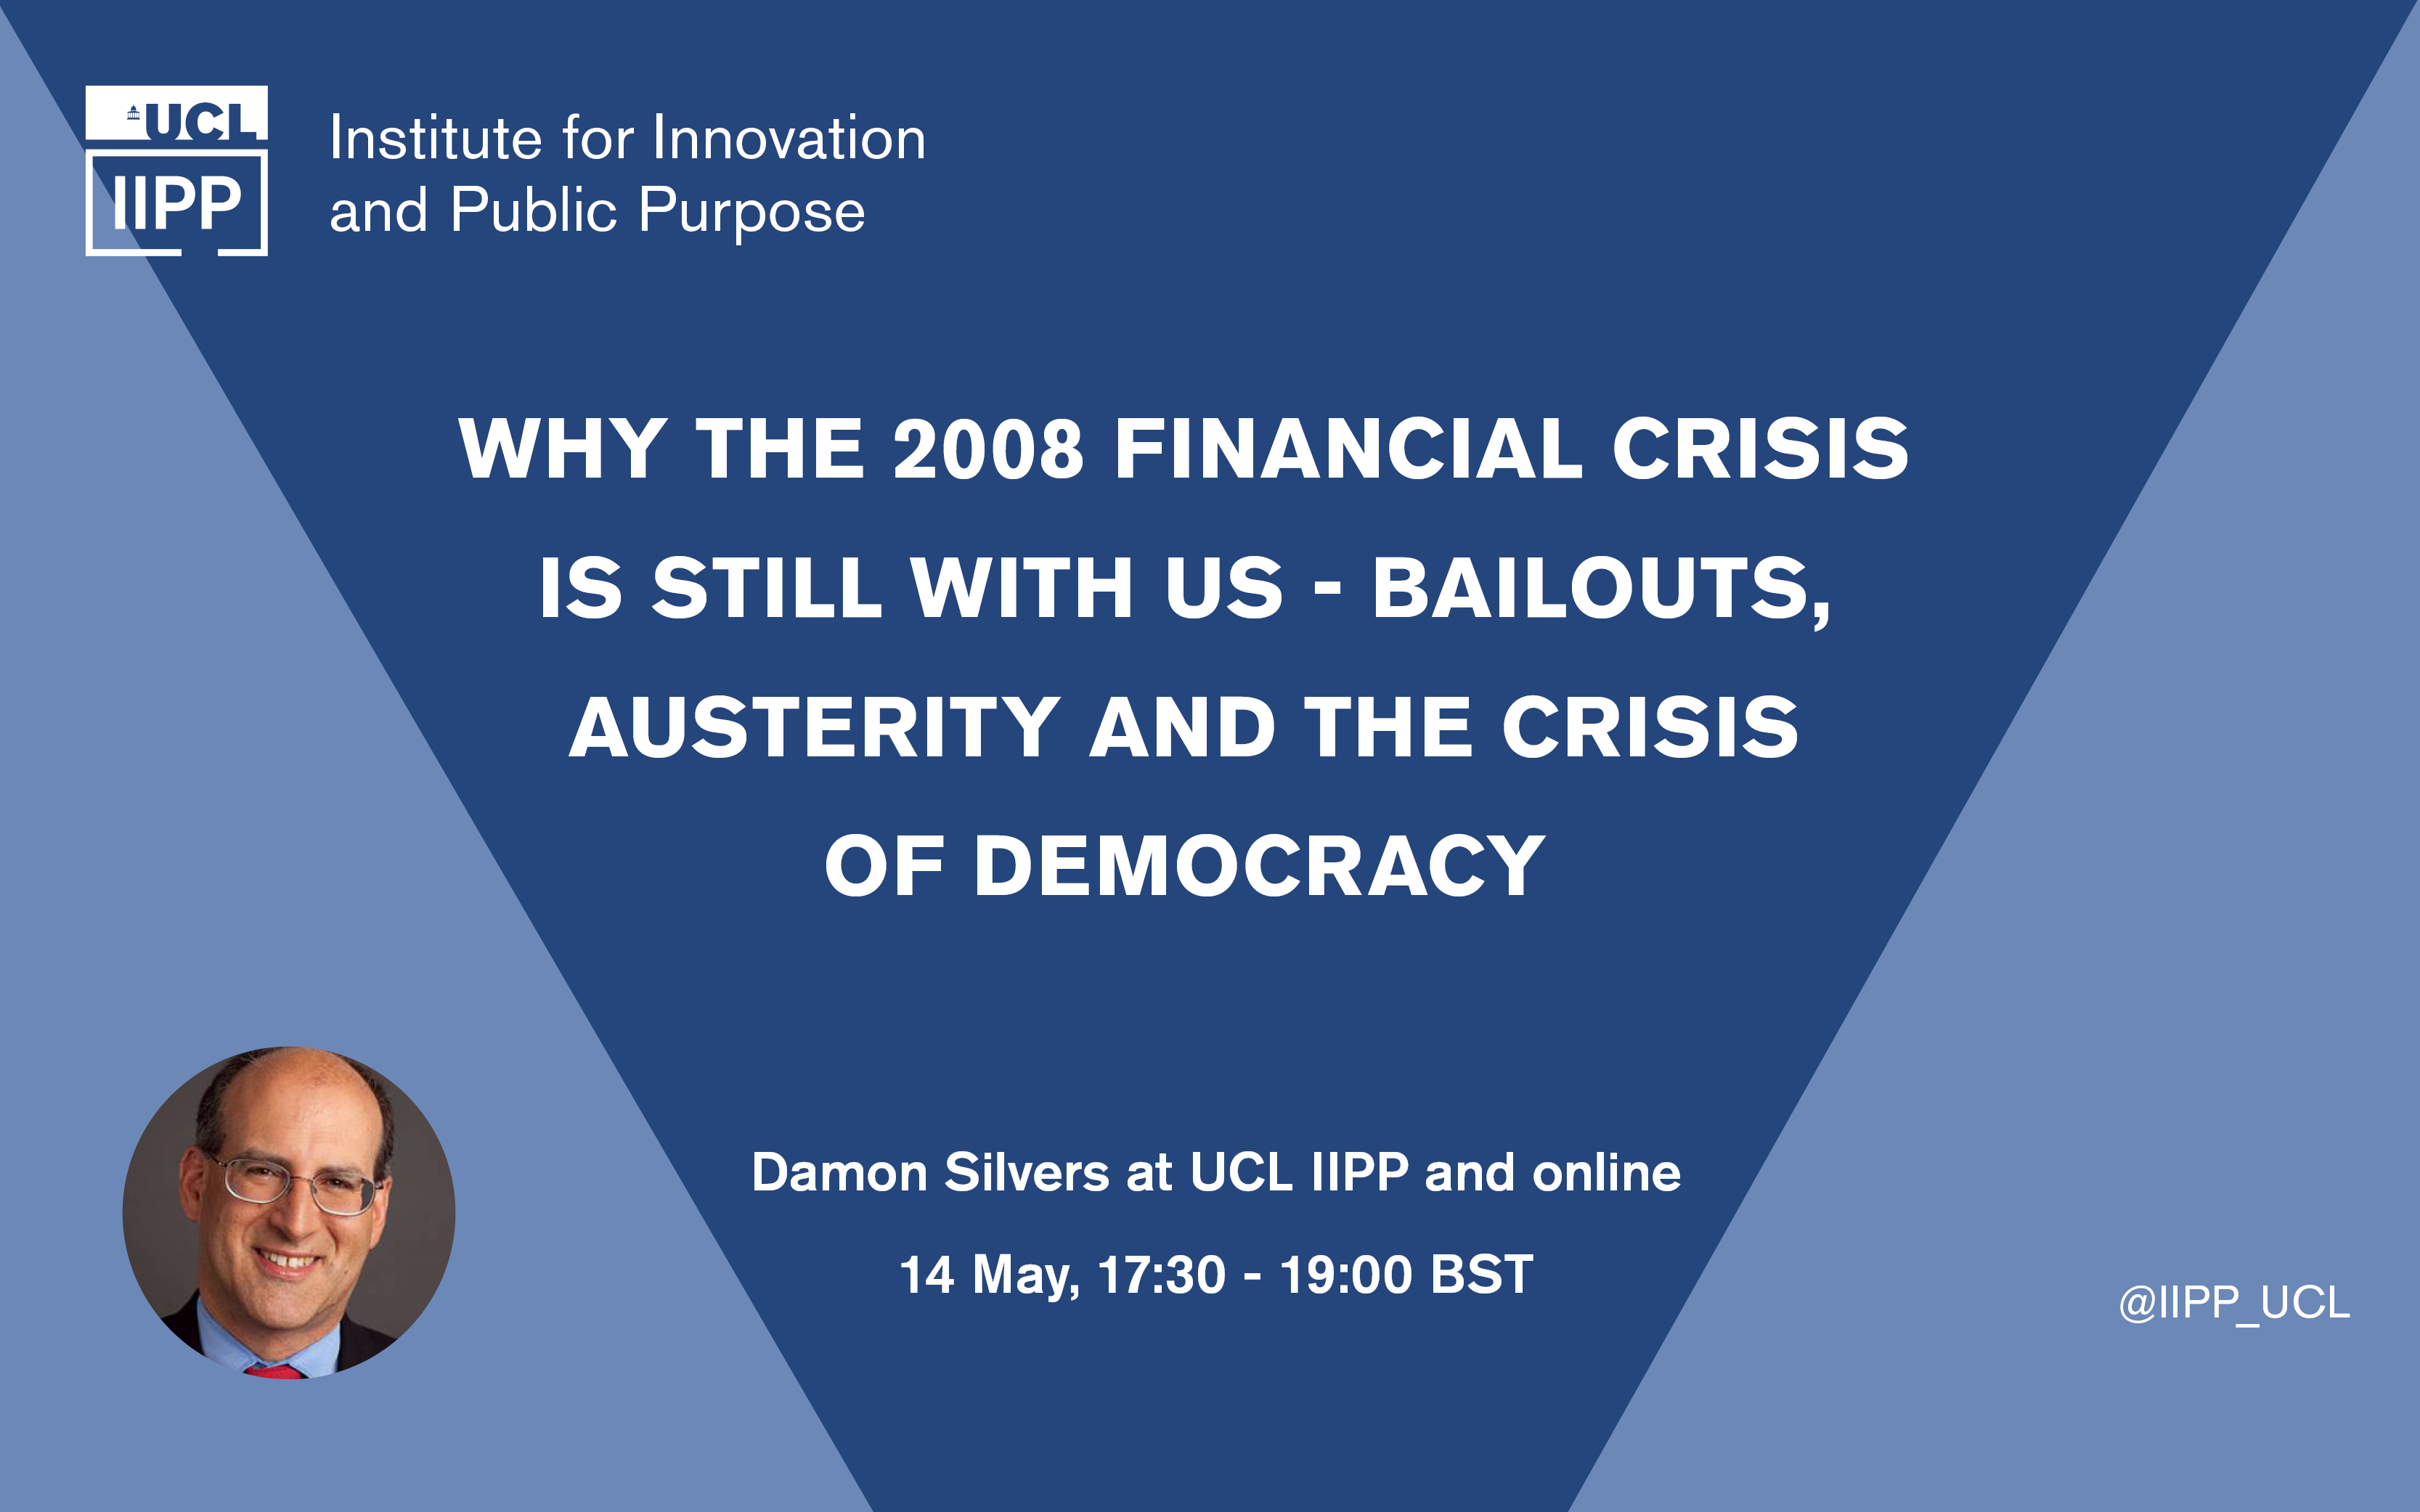 Why the 2008 Financial Crisis Is Still With Us--Bailouts, Austerity and the Crisis of Democracy with Damon Silvers at UCL IIPP